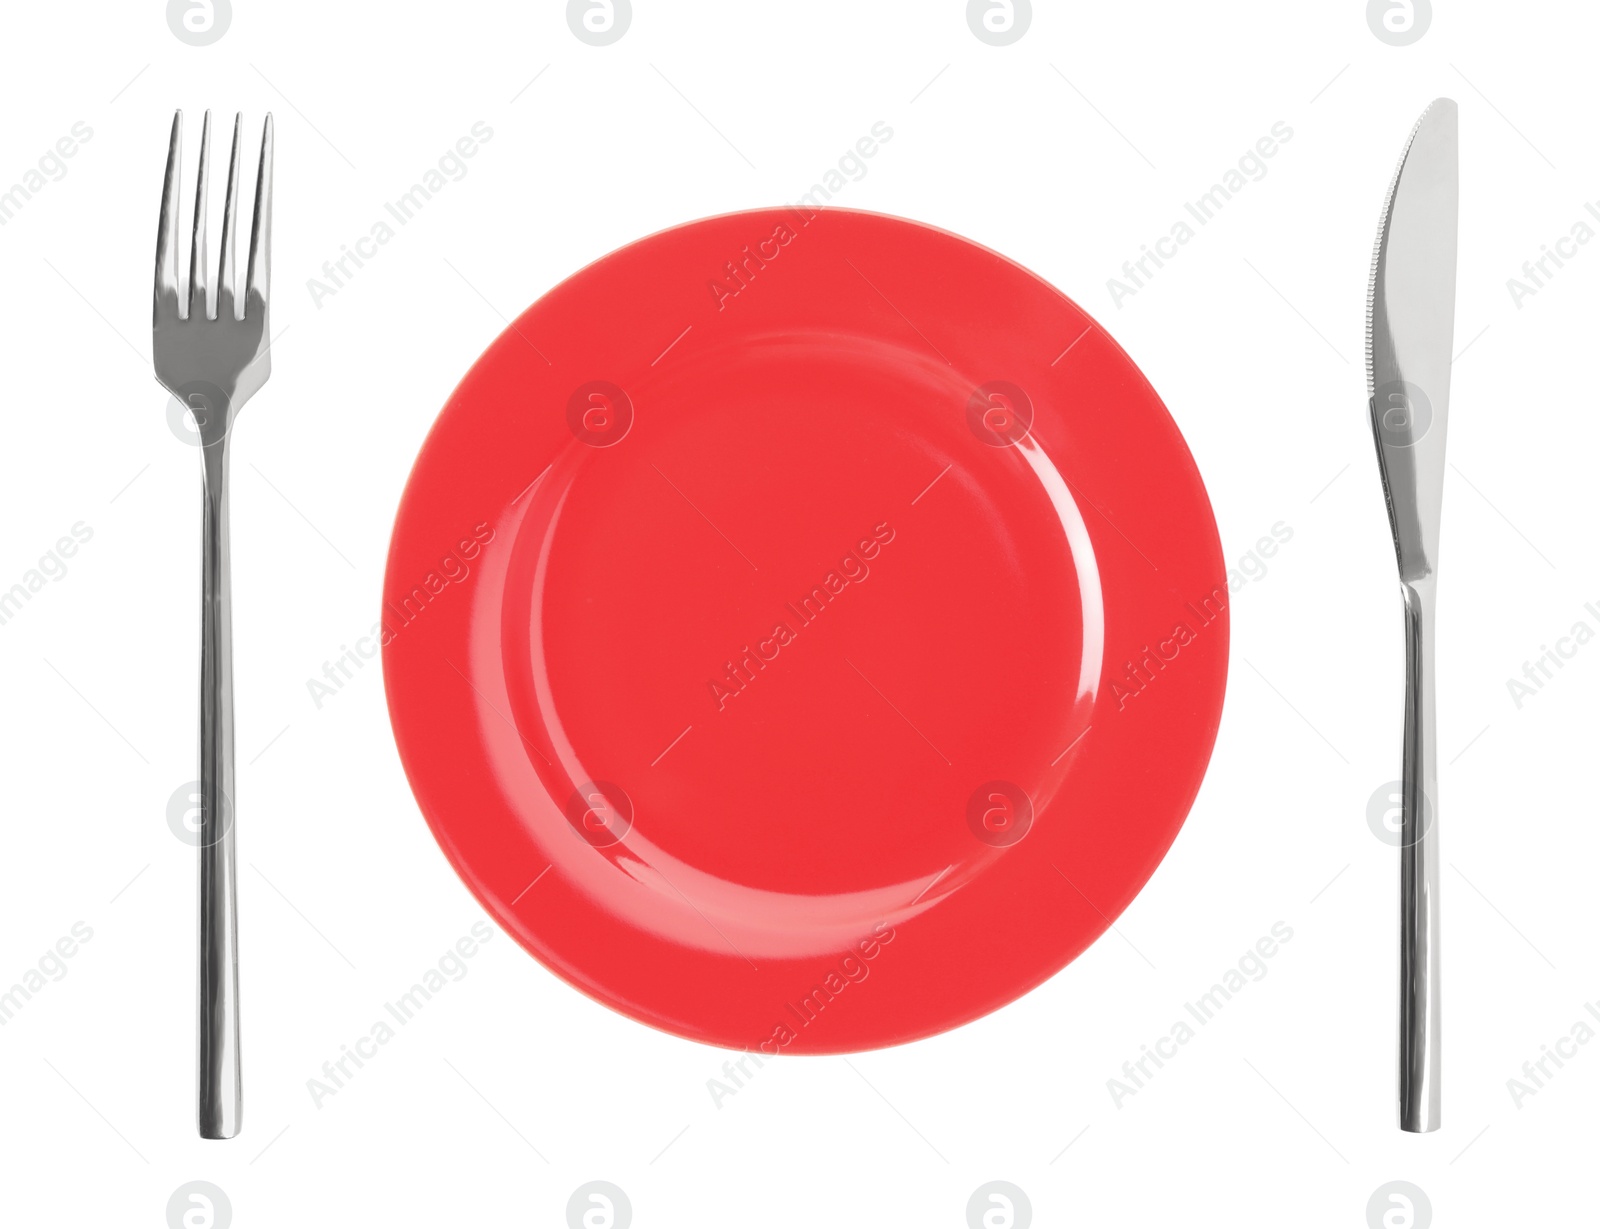 Image of Empty red plate with fork and knife on white background, top view